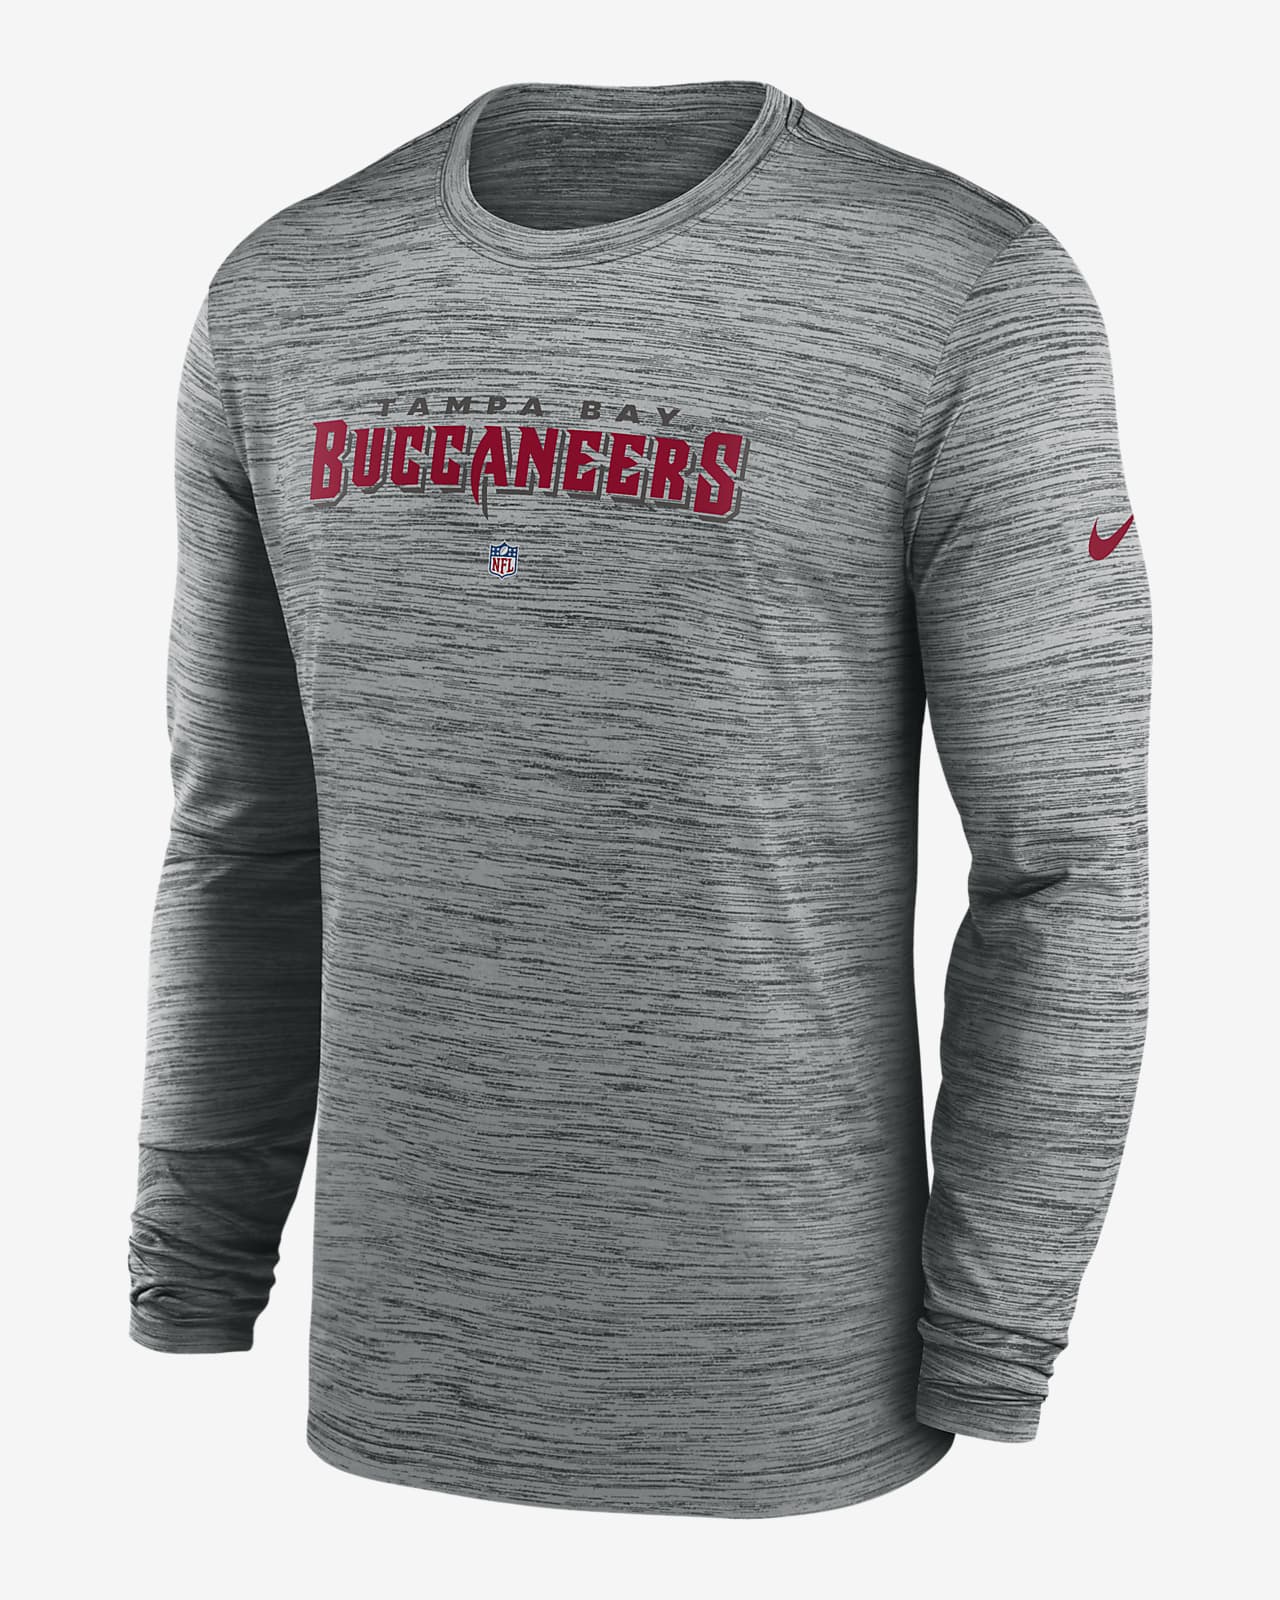 Nike Men's Dri-Fit Sideline Velocity (NFL Tampa Bay Buccaneers) Long-Sleeve T-Shirt in Grey, Size: Large | 00KX06G8B-078